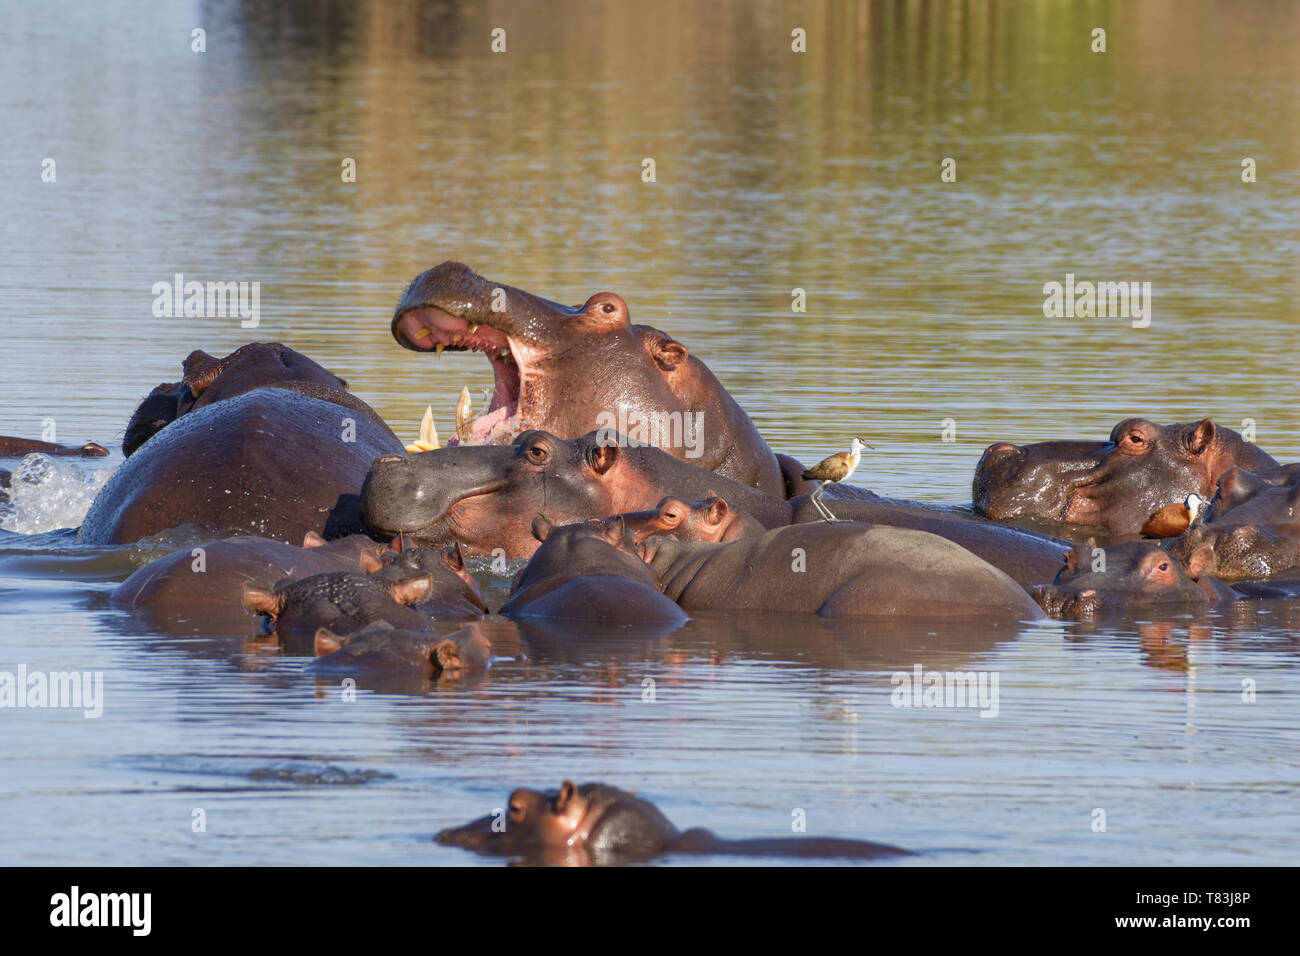 Hippopotamuses (Hippopotamus amphibius), herd with young hippo, an adult fighting, piled one on the other, bathing, with two African jacanas,Kruger NP Stock Photo